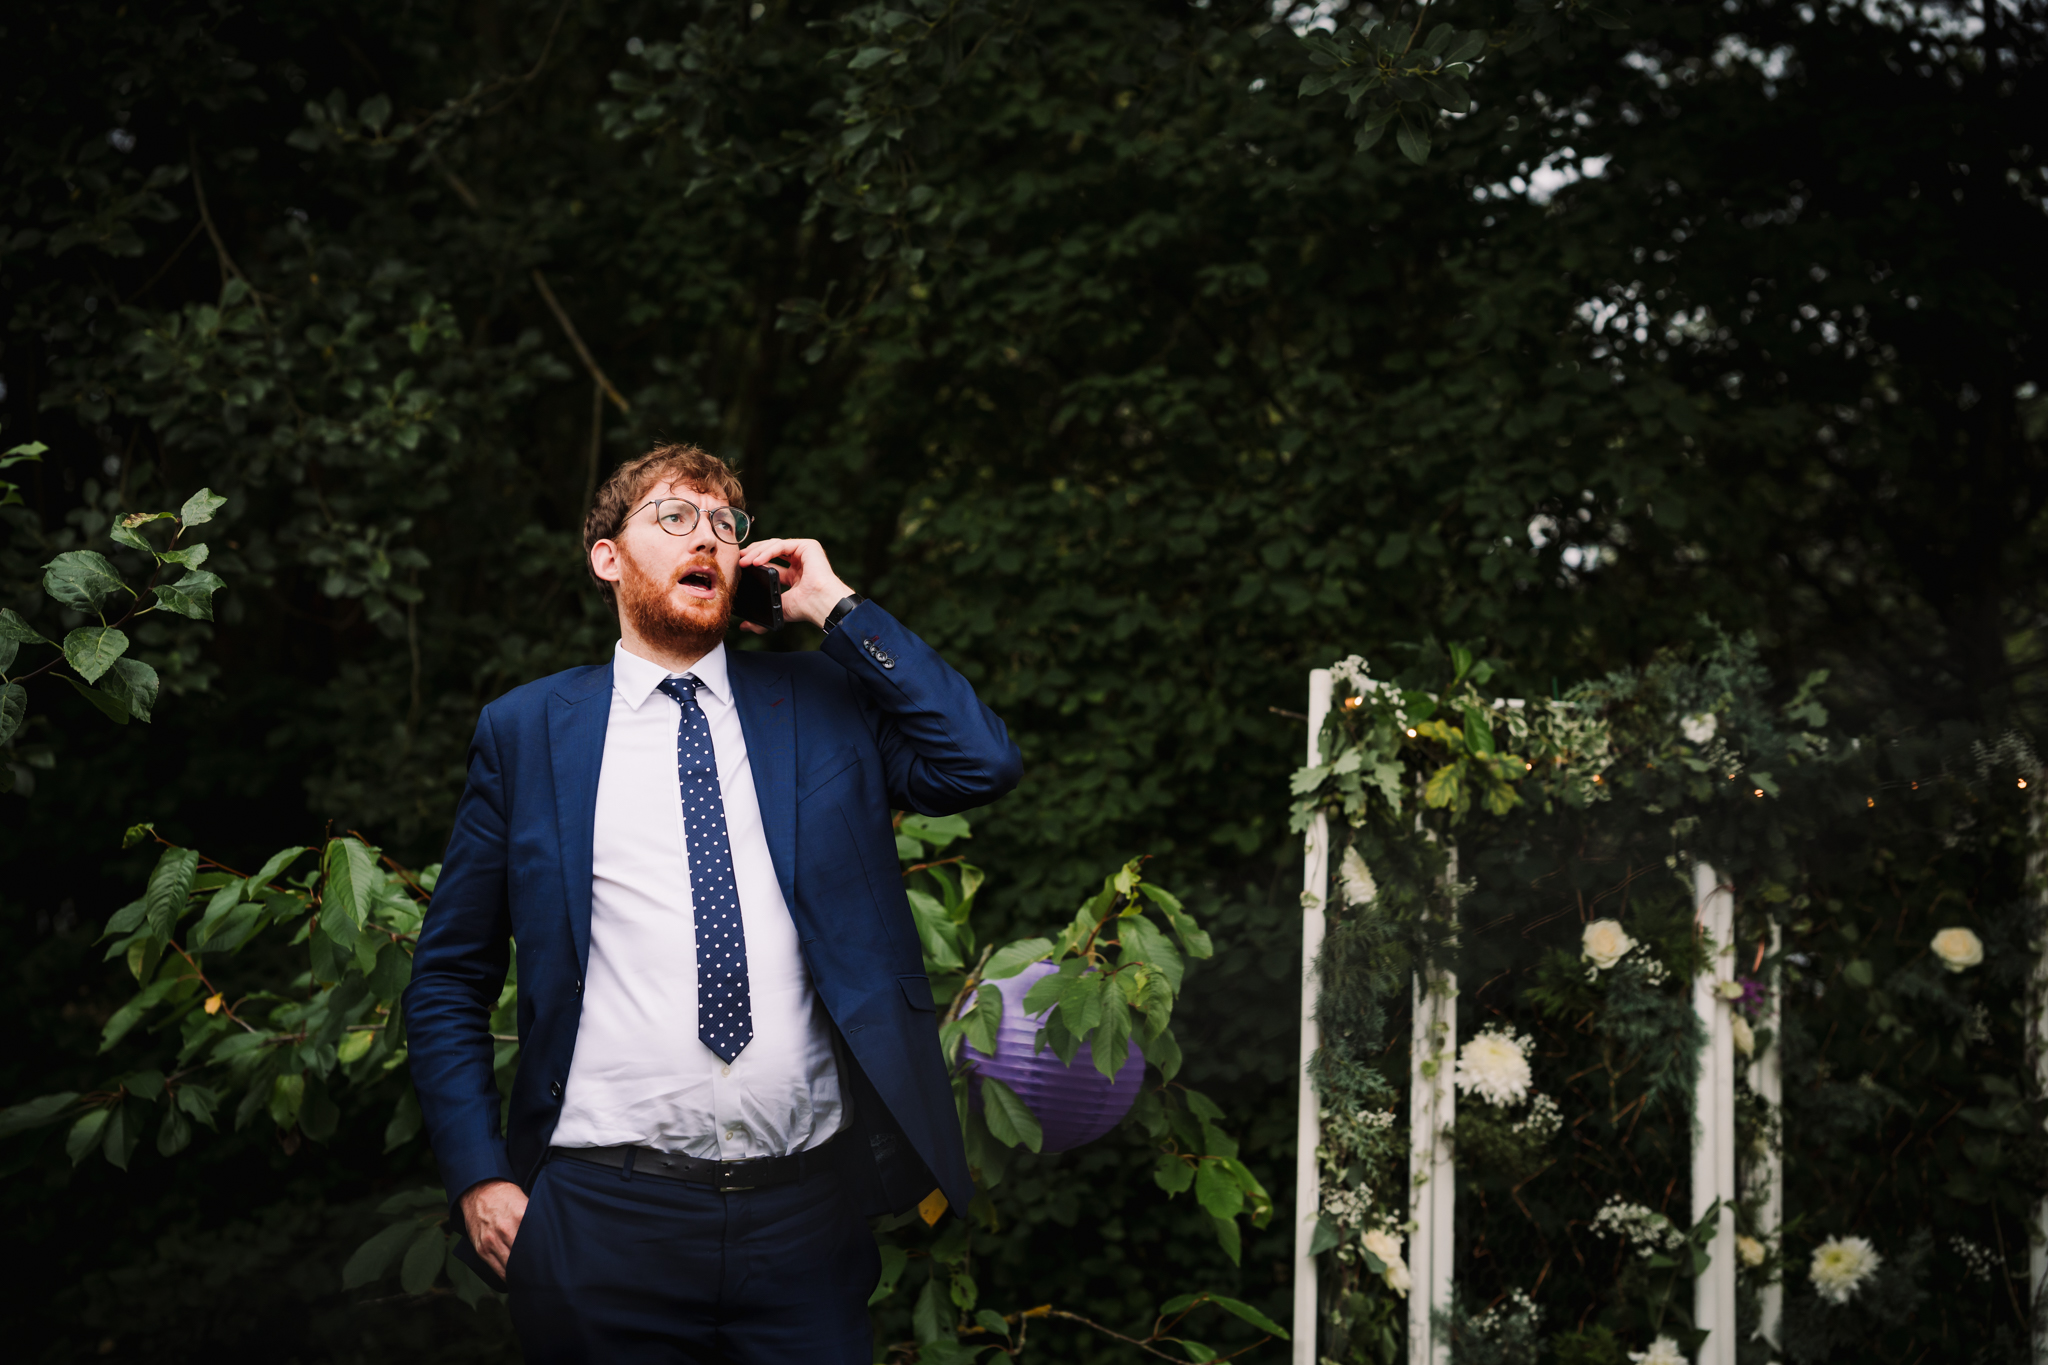 hertfordshire wedding guest has a phone conversation during the garden party reception